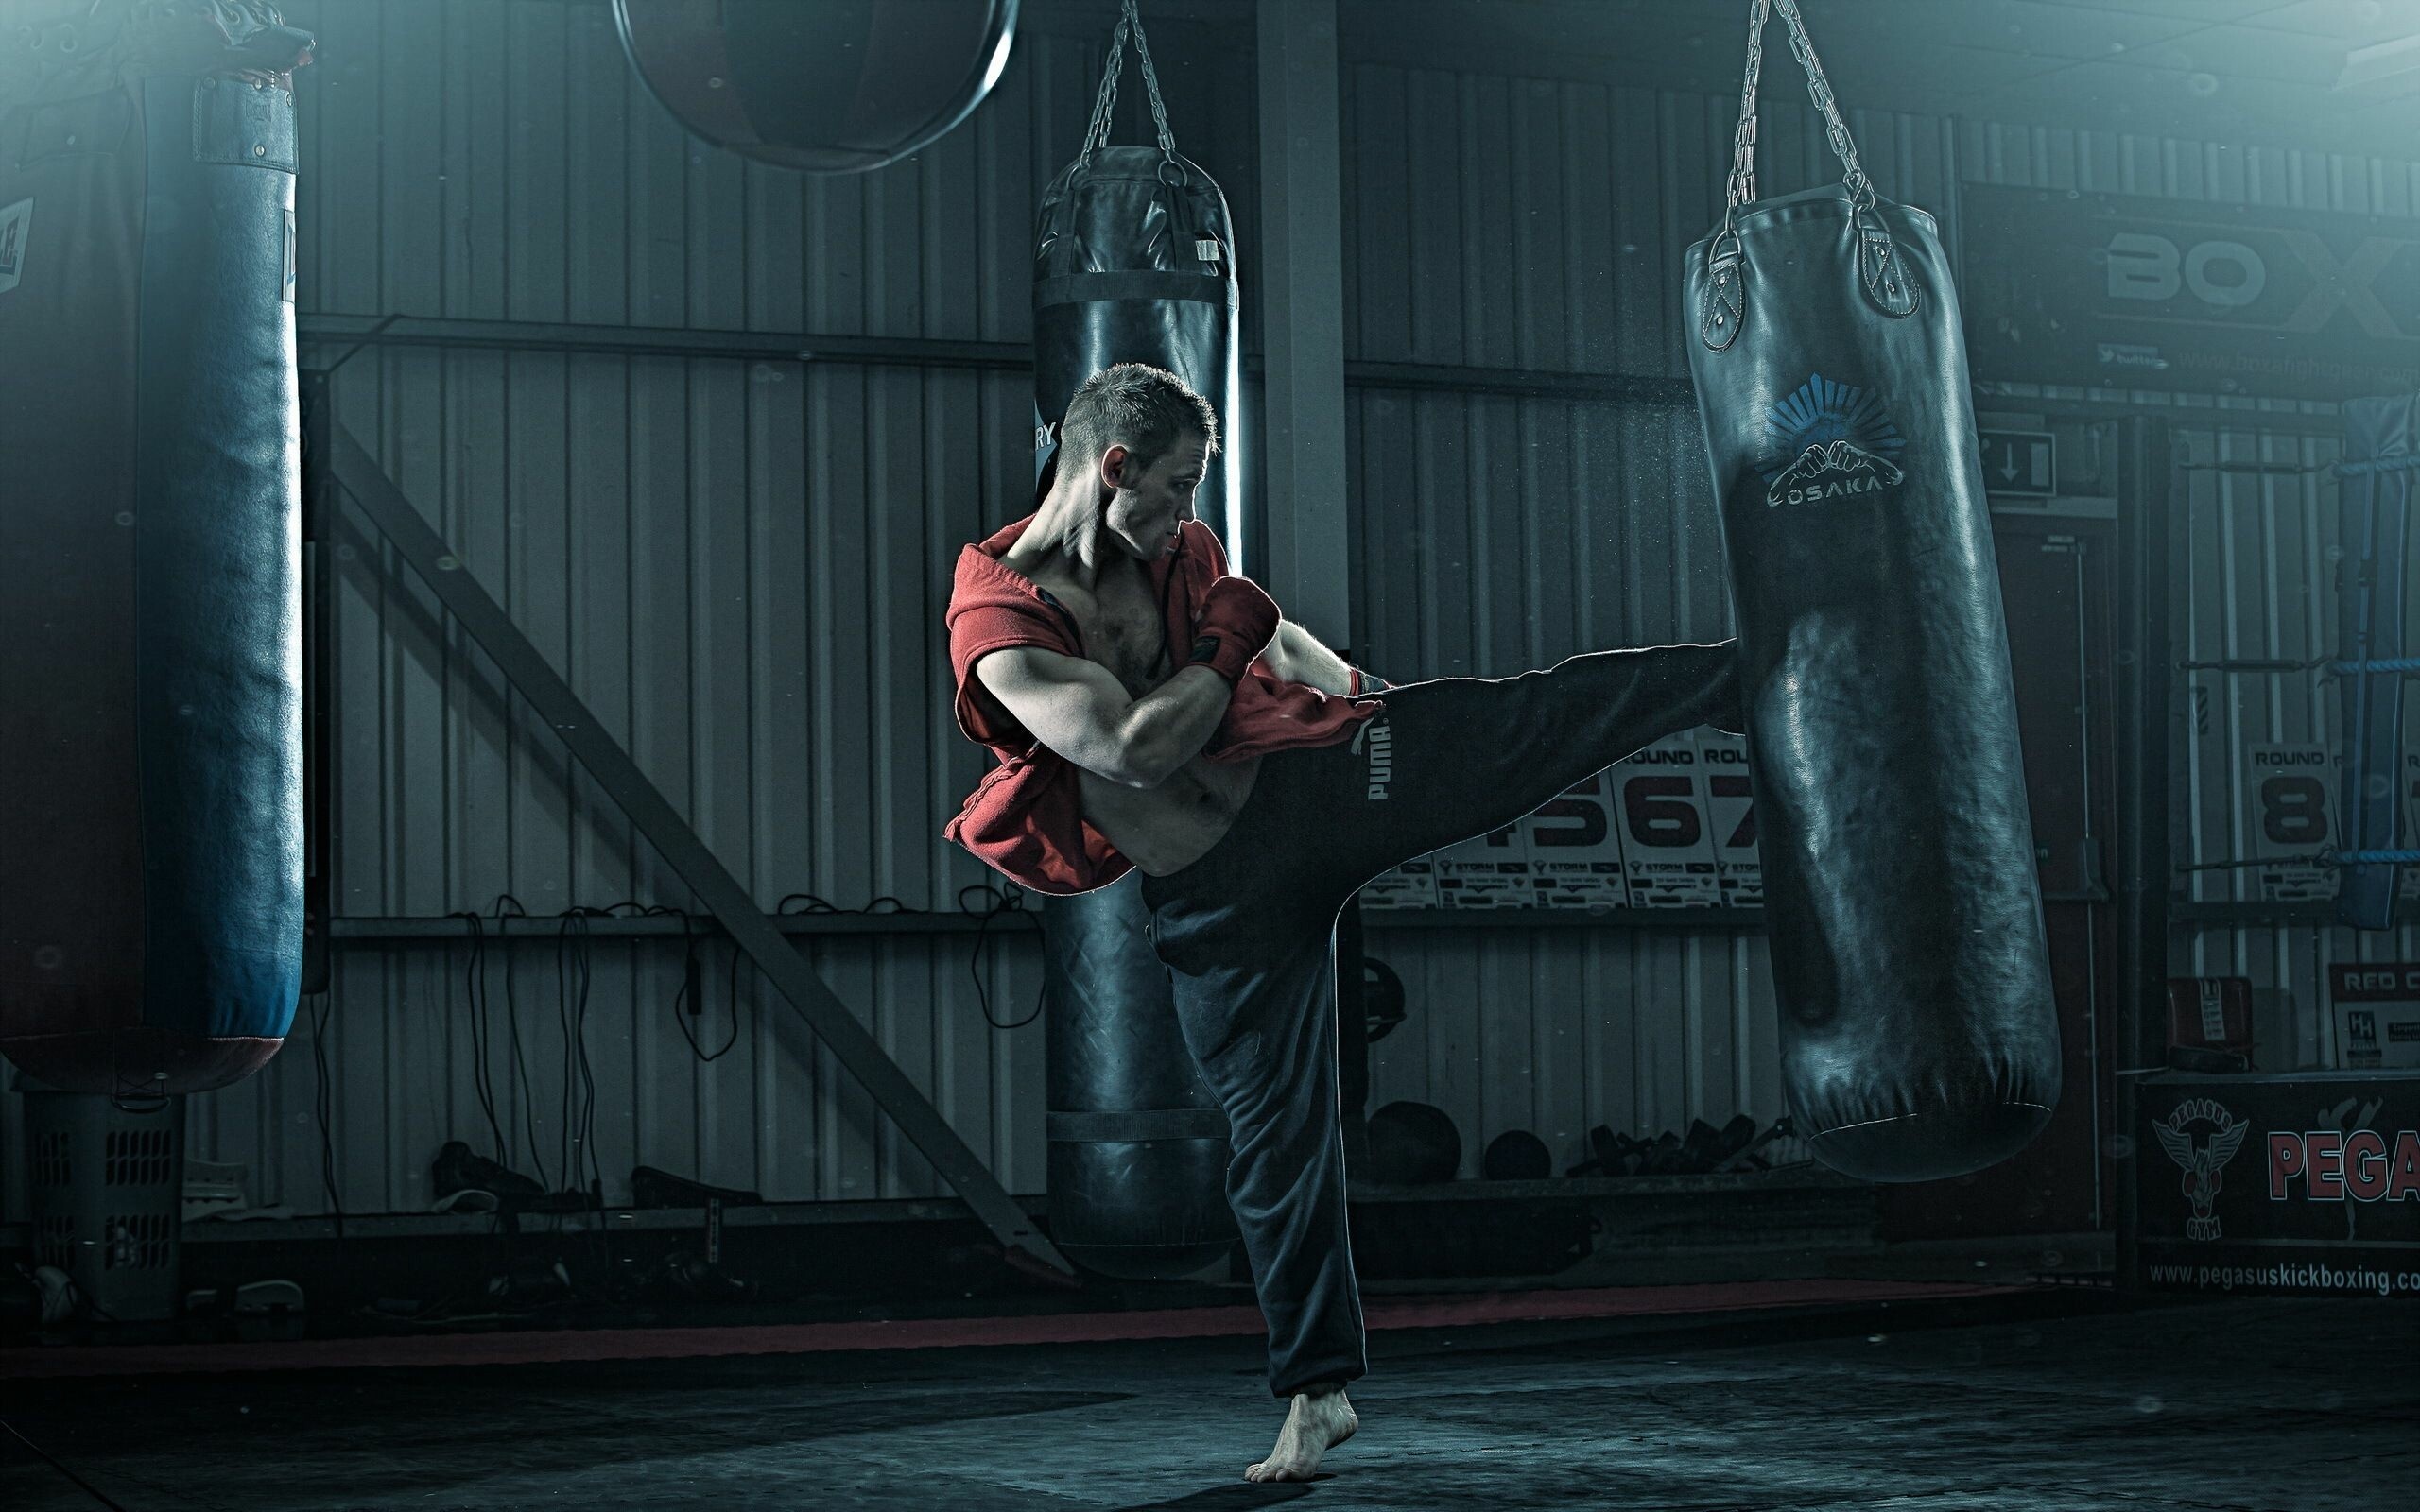 Martial Art: Kickboxing, Good for general health and fighting, Use the feet to hit and kick. 2560x1600 HD Background.